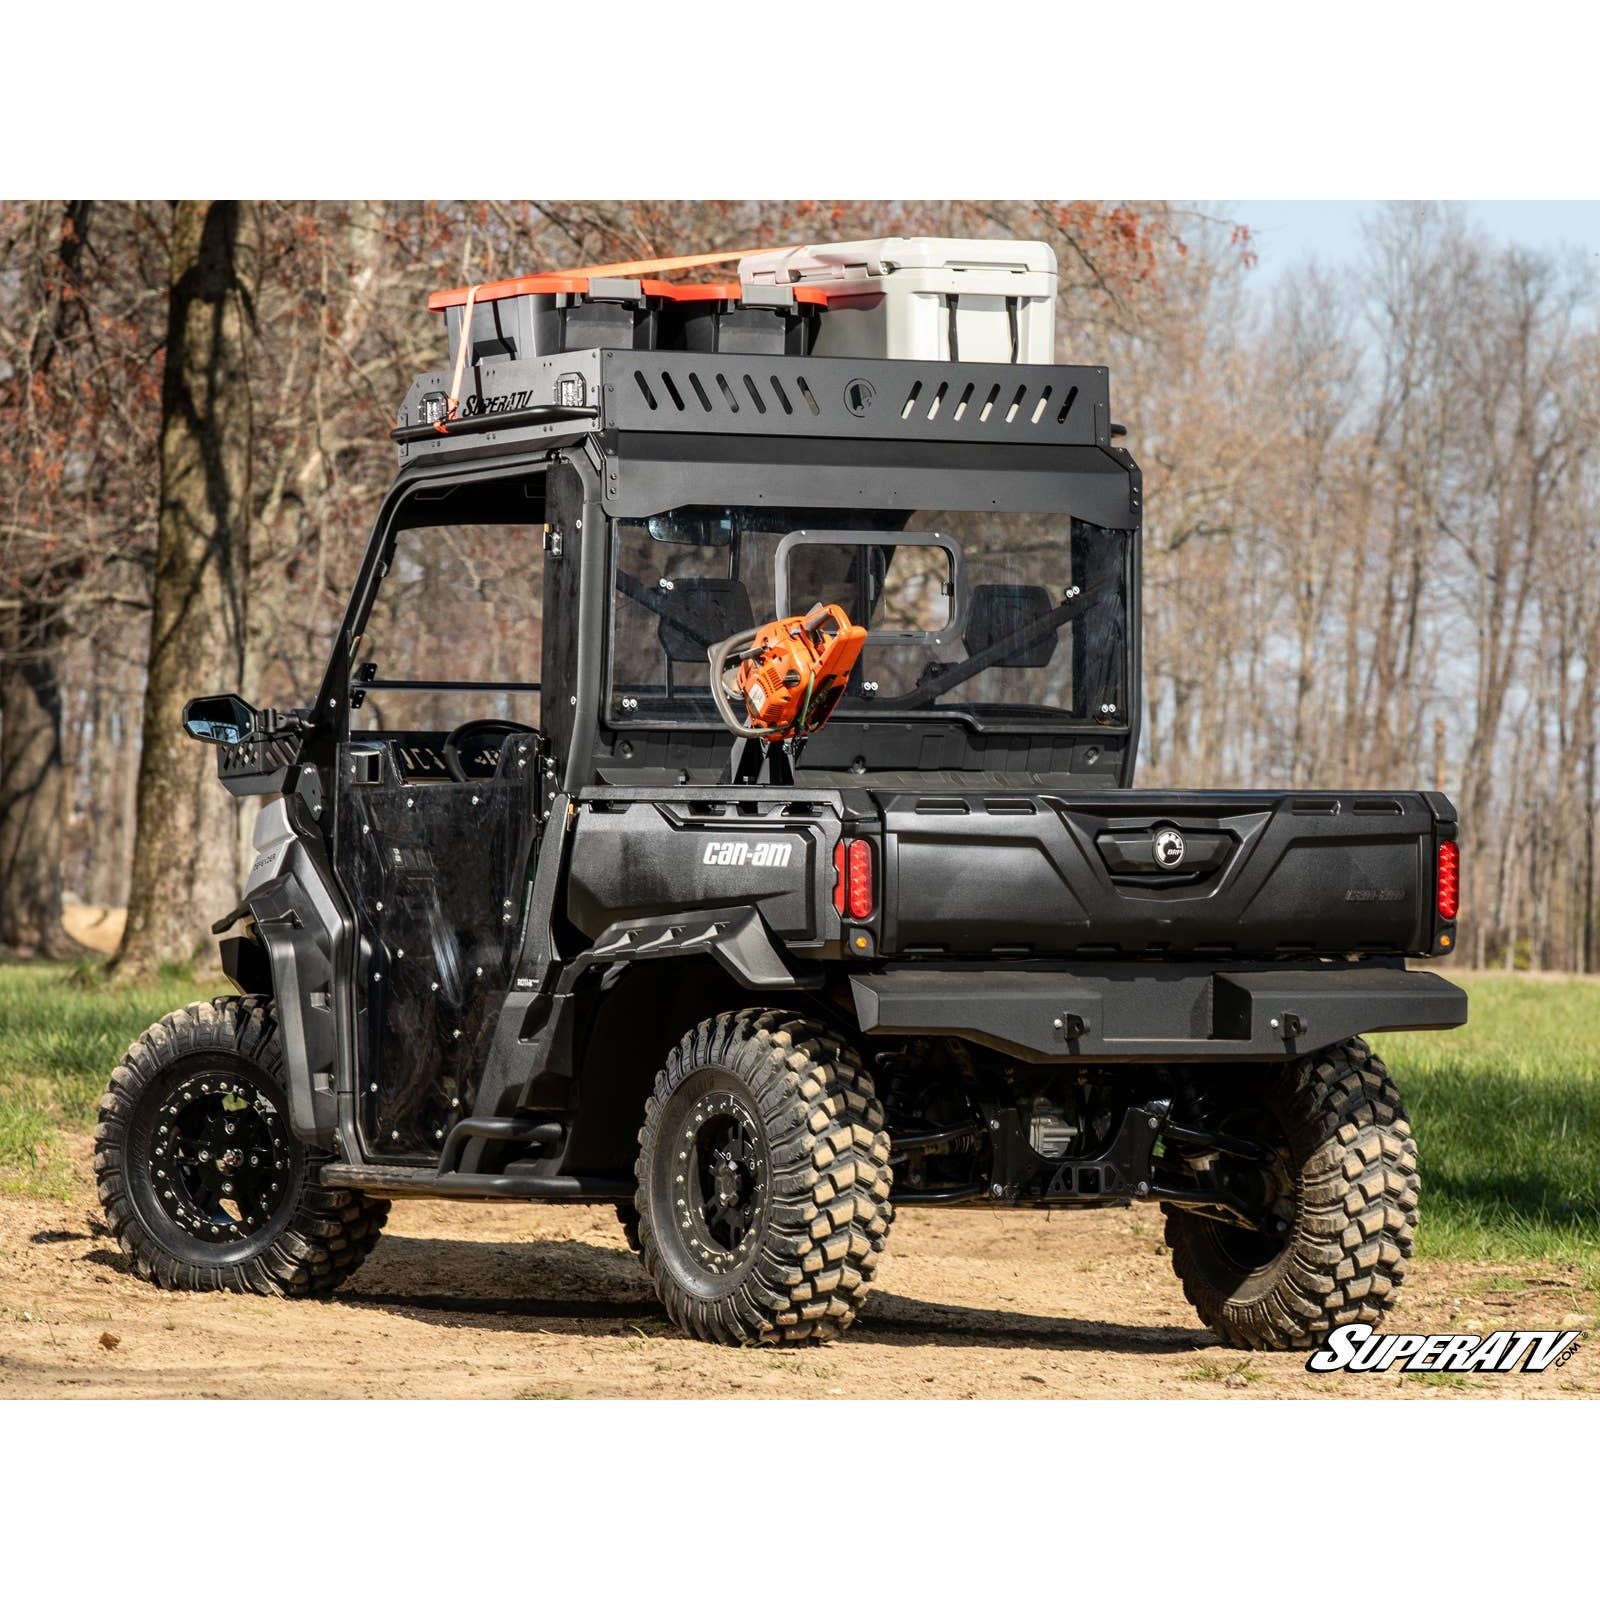 Can Am Defender Outfitter Roof Rack | SuperATV